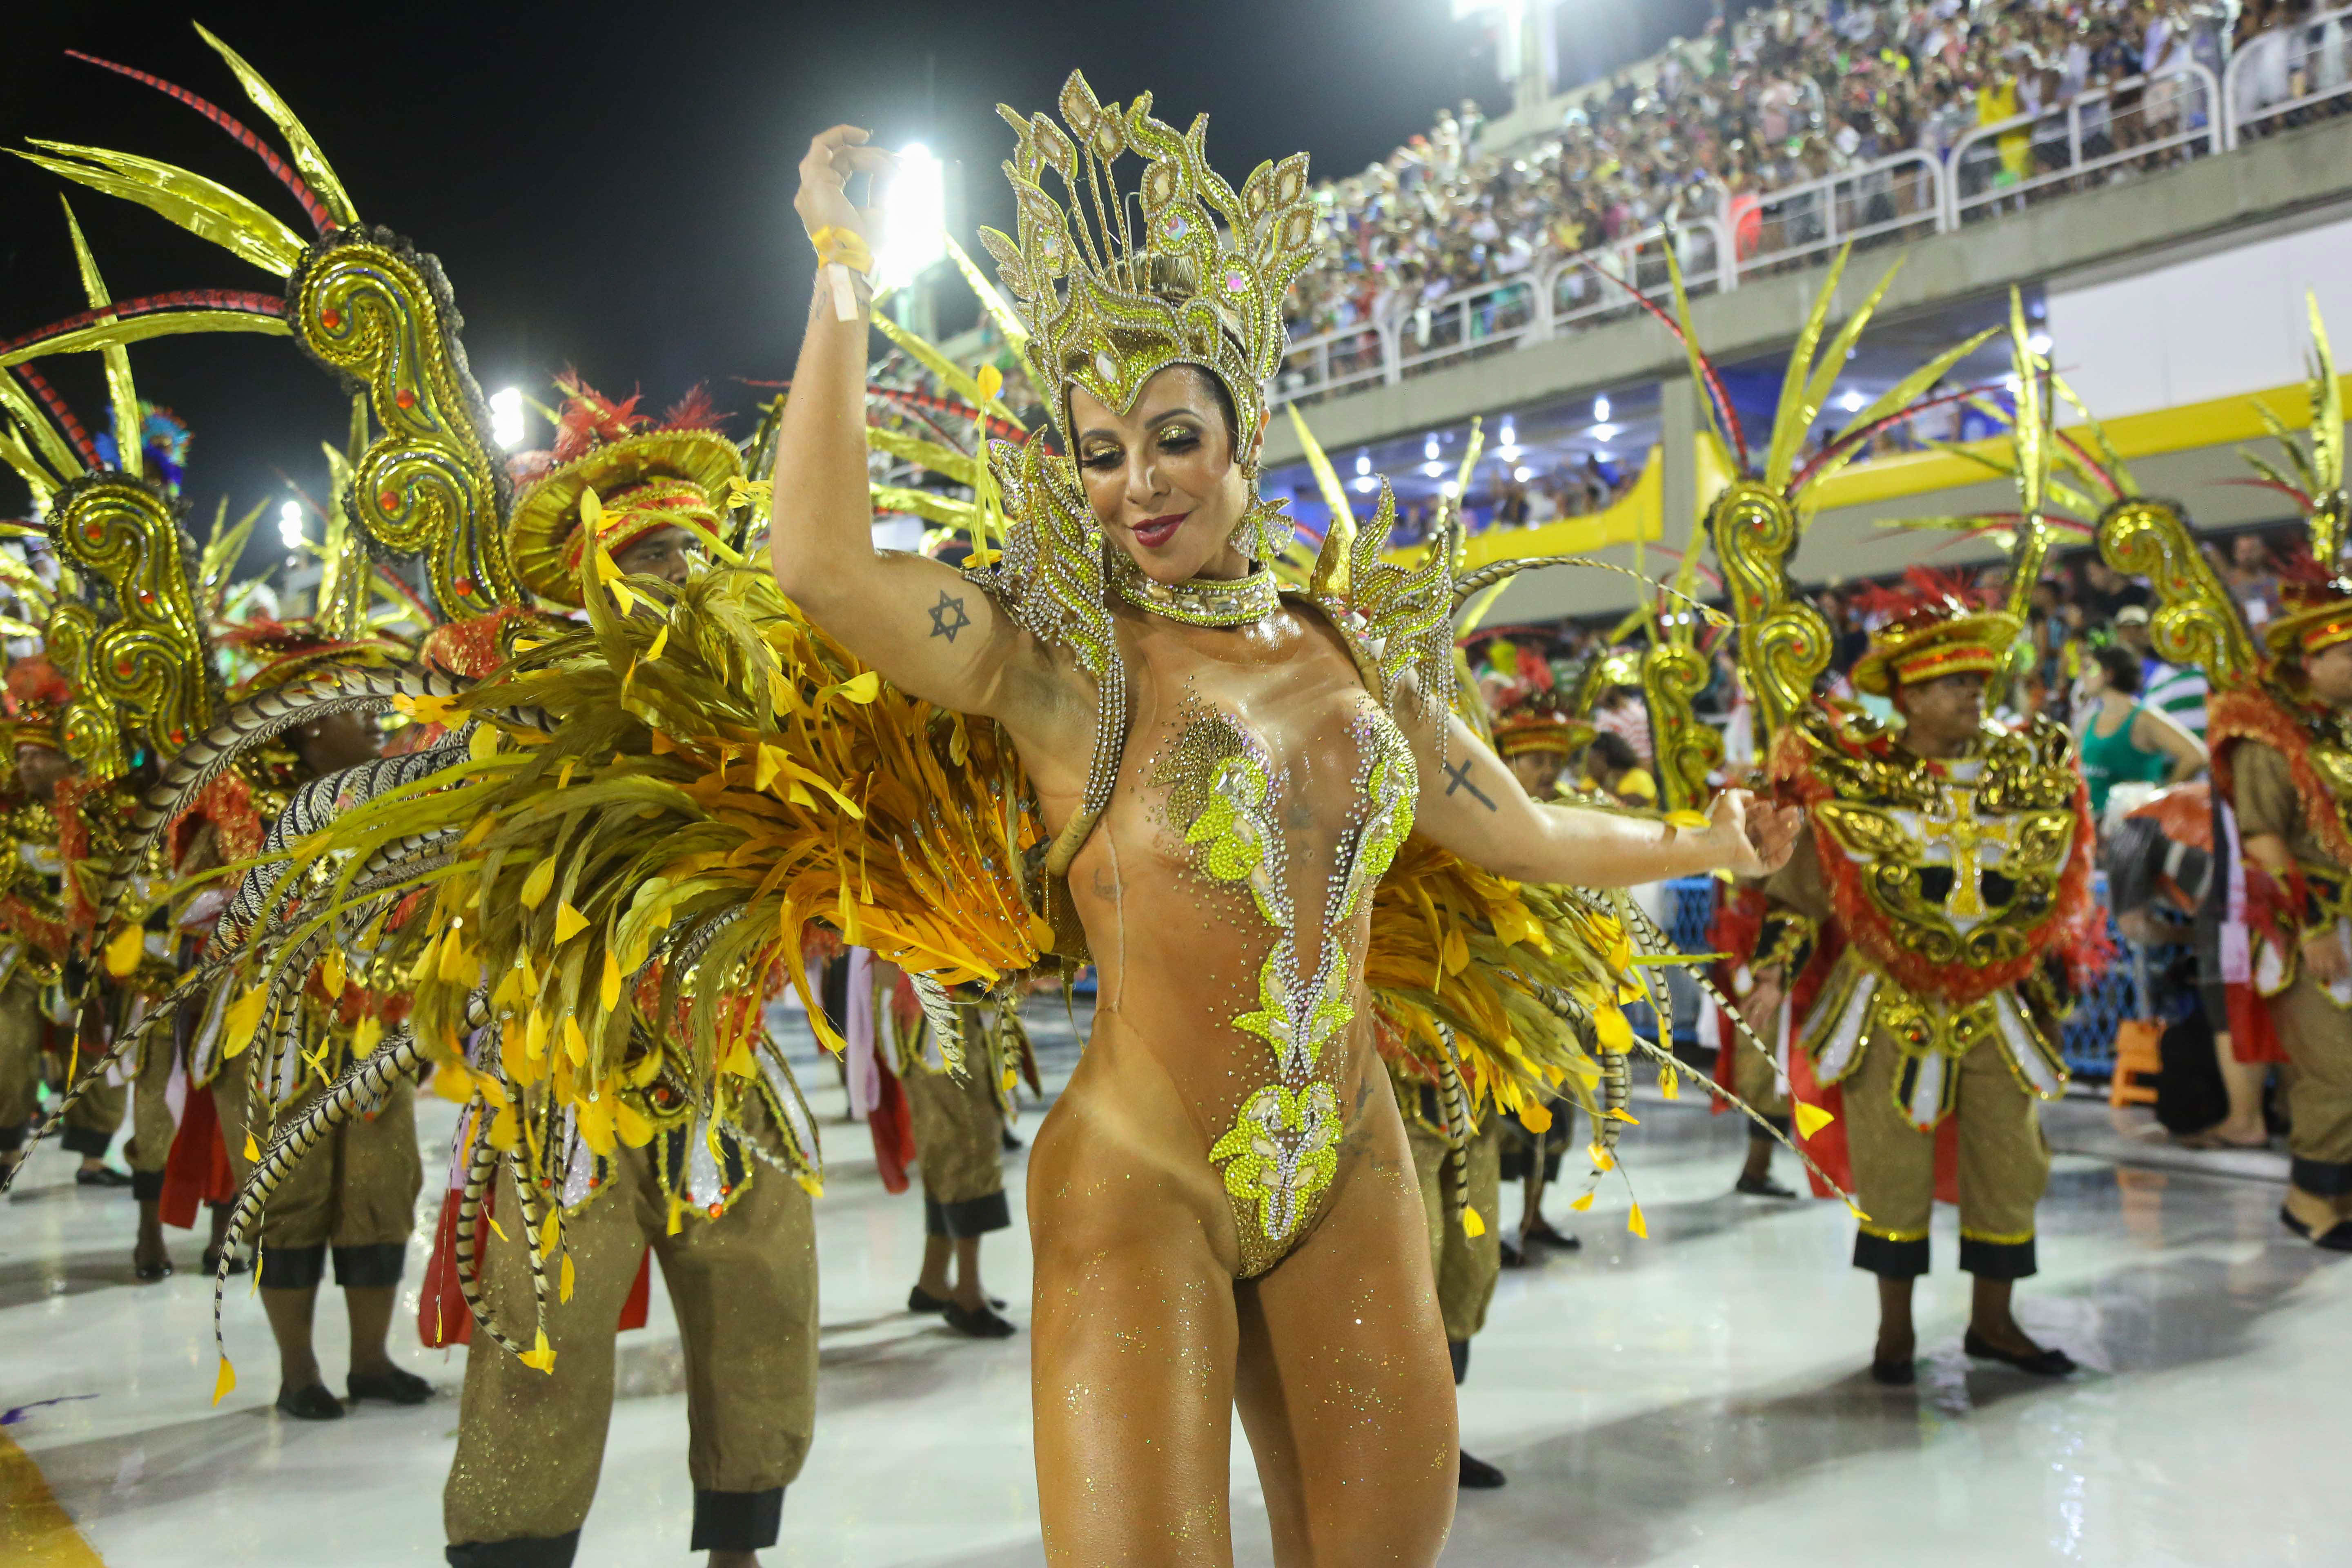 People of the Samba School Academicos de Vigario geral perform during the R...